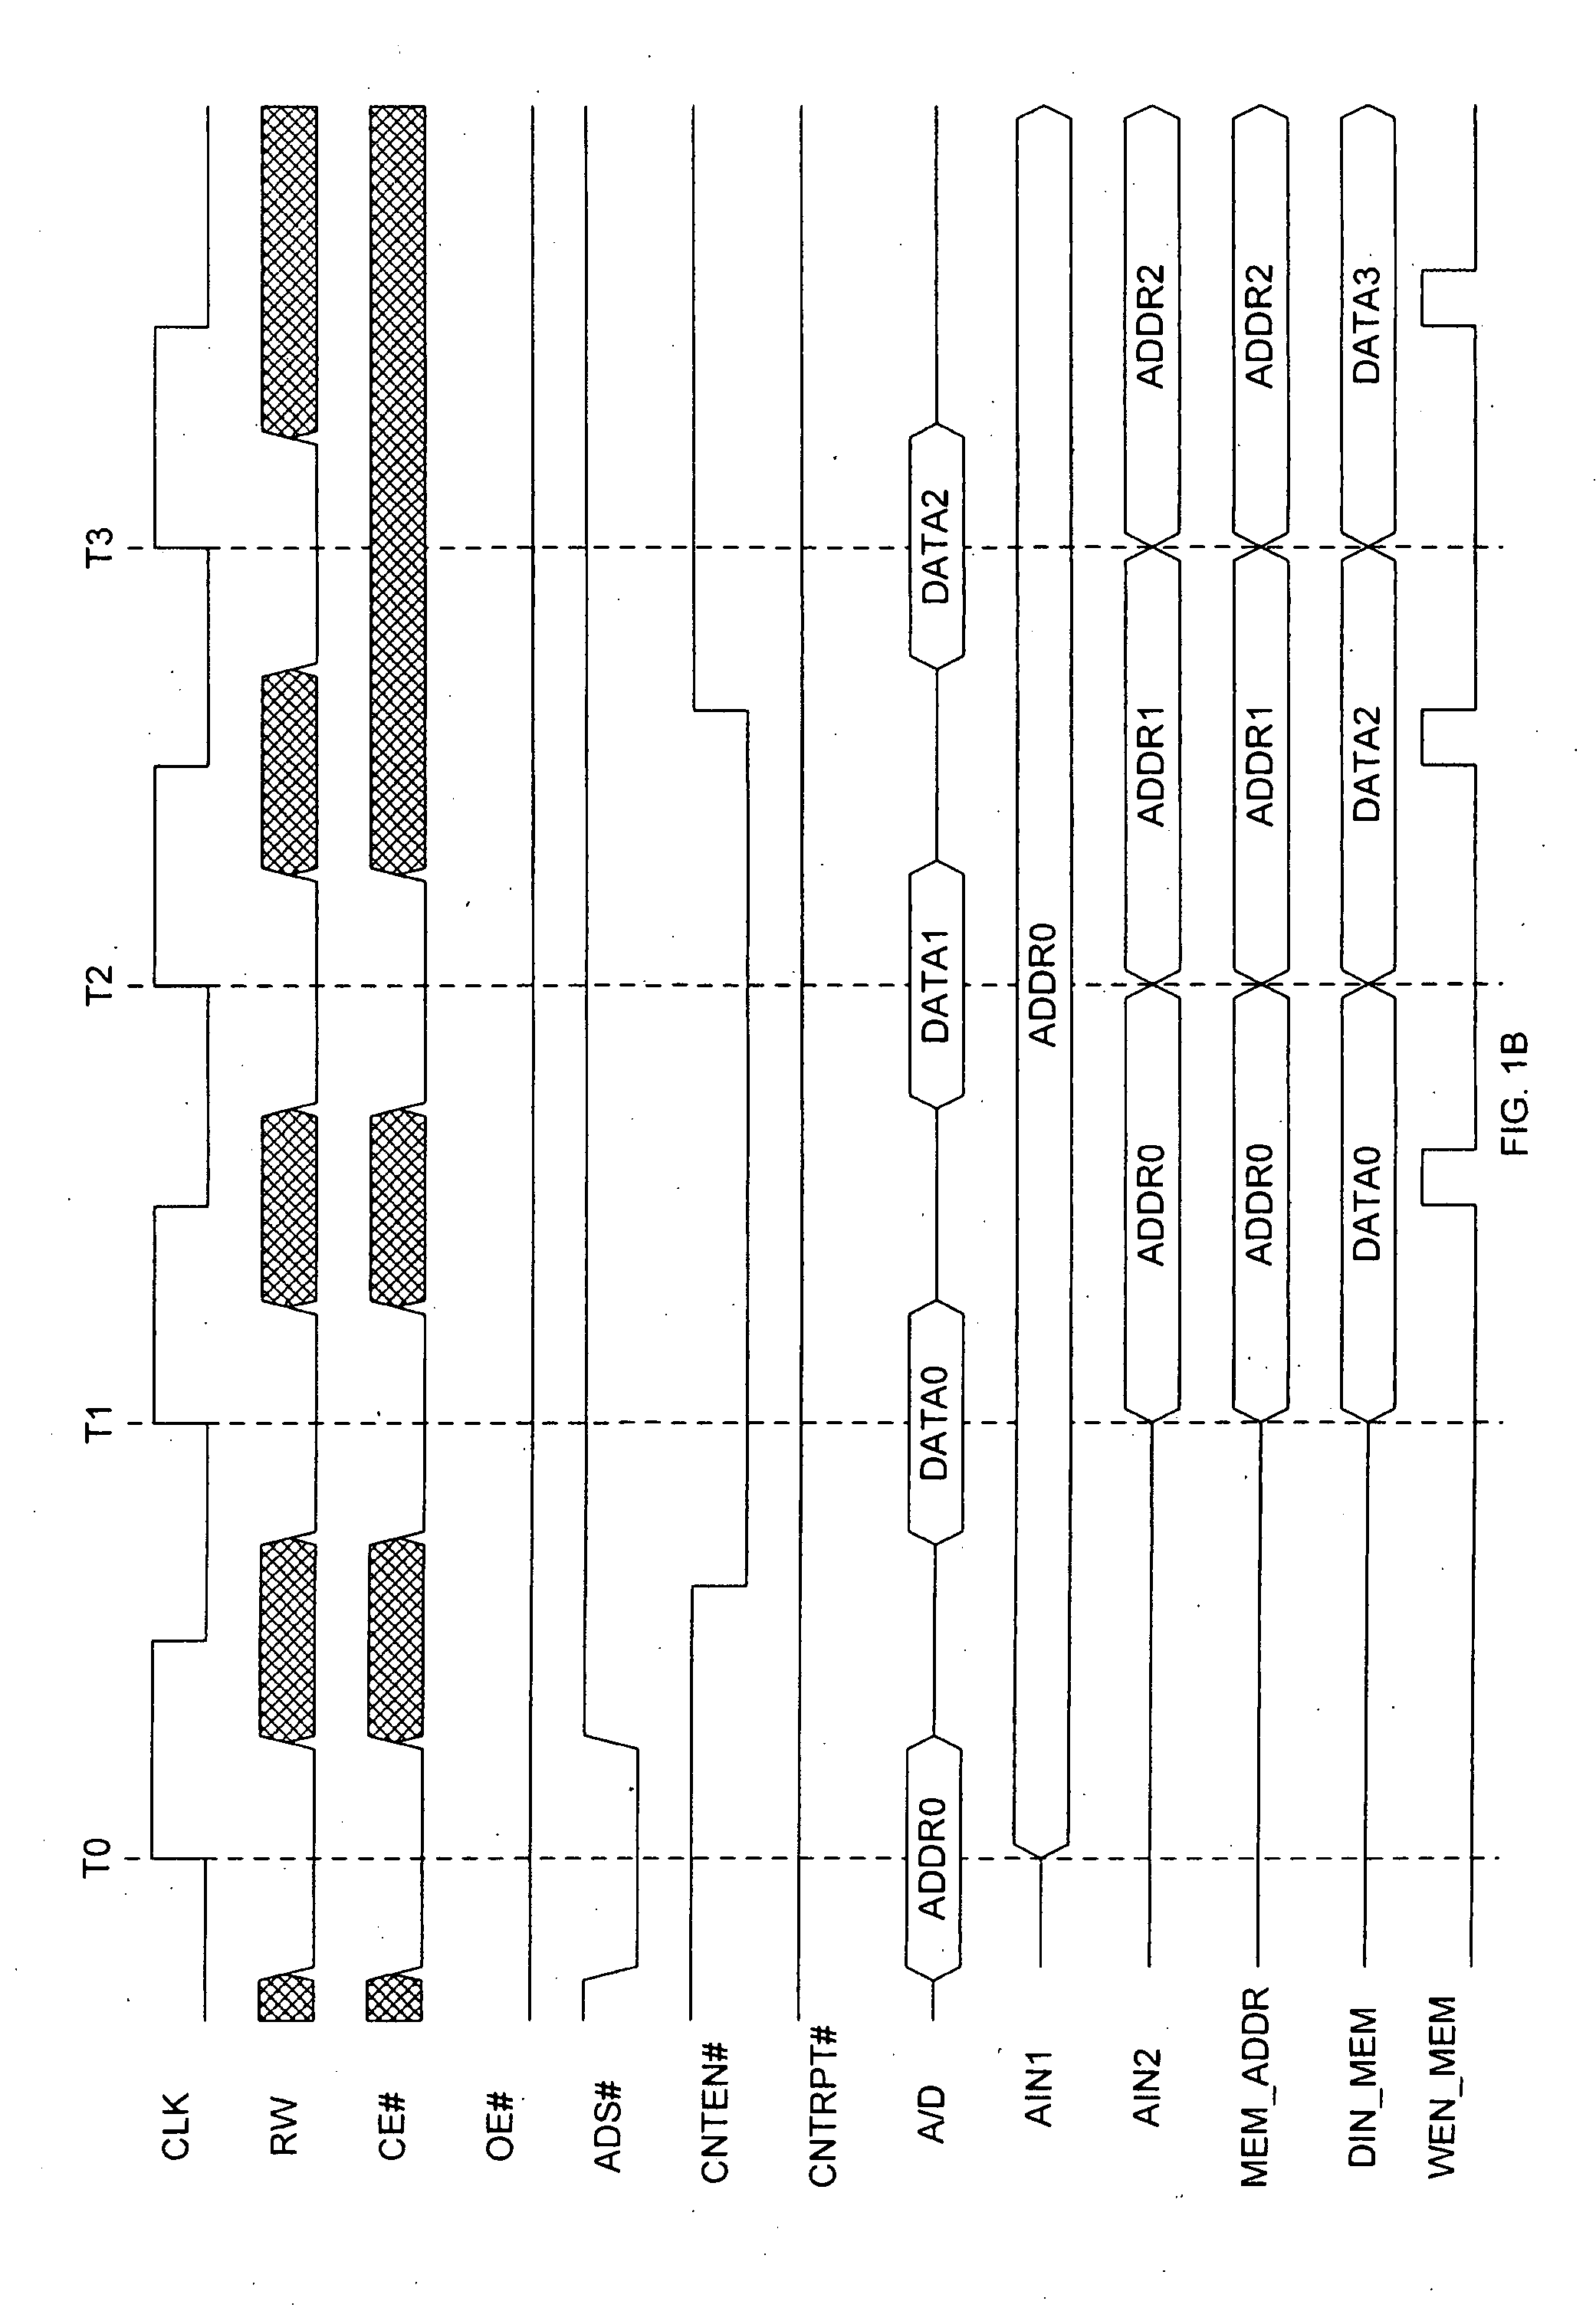 Synchronous Address And Data Multiplexed Mode For SRAM